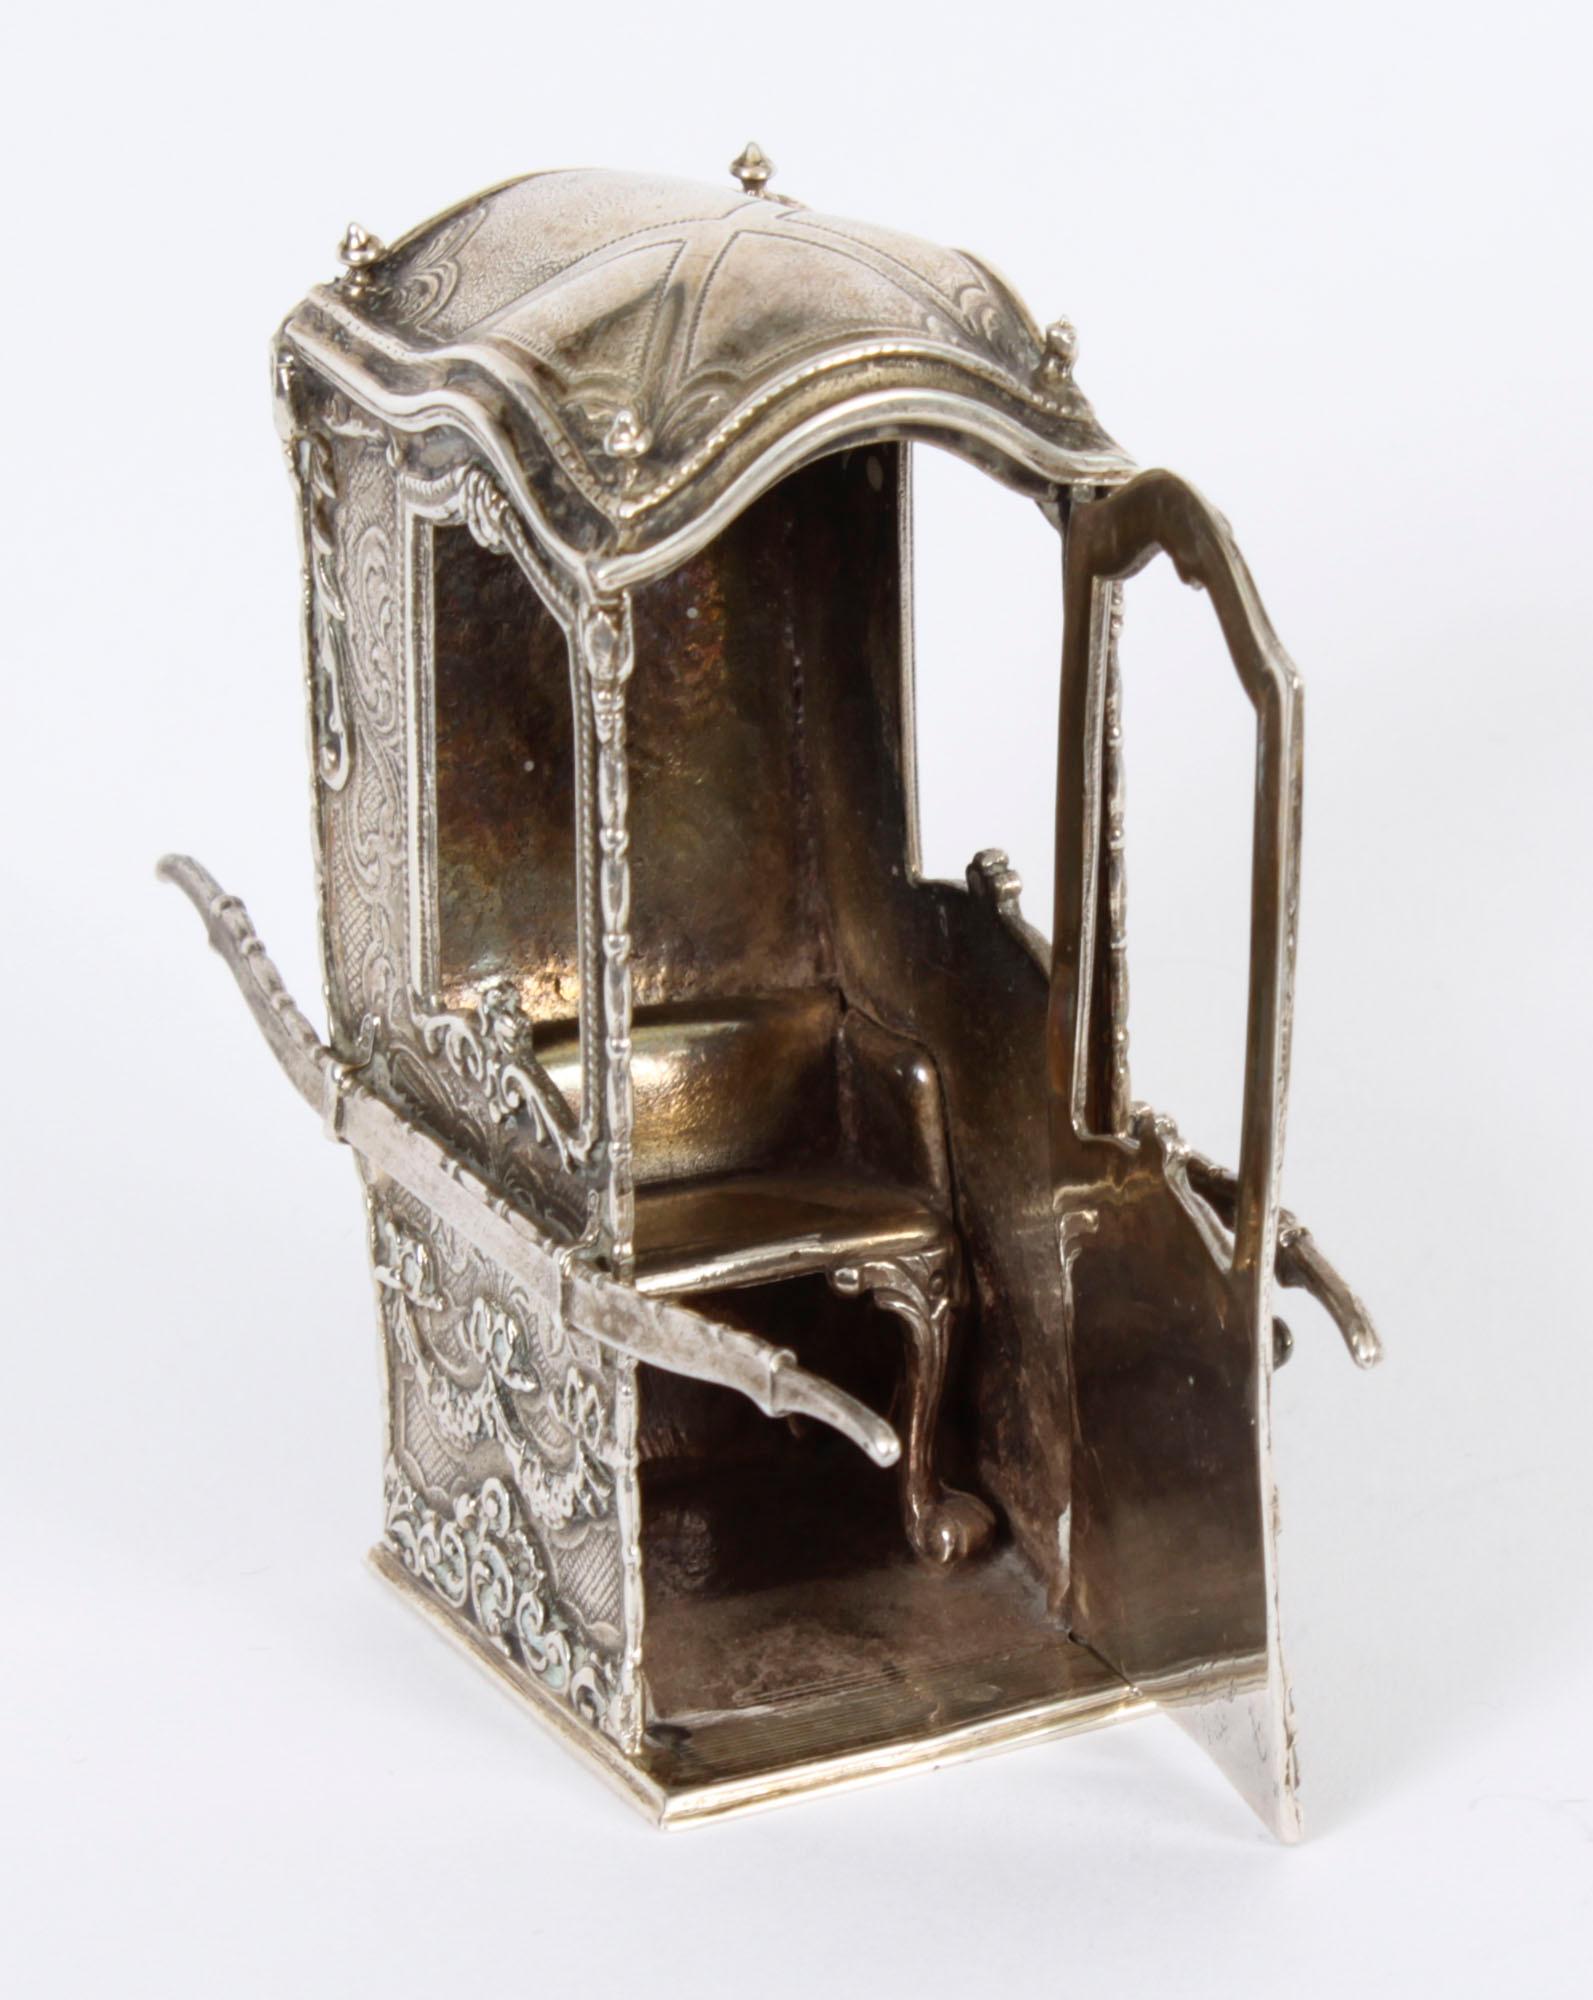 This is a charming antique French 800 silver miniature sedan chair, Circa 1870 in date.

The sedan chair beautifully detailed, the door opens to reveal a seat, the silver with fabulous embossed decoration.

Condition:
In excellent condition with